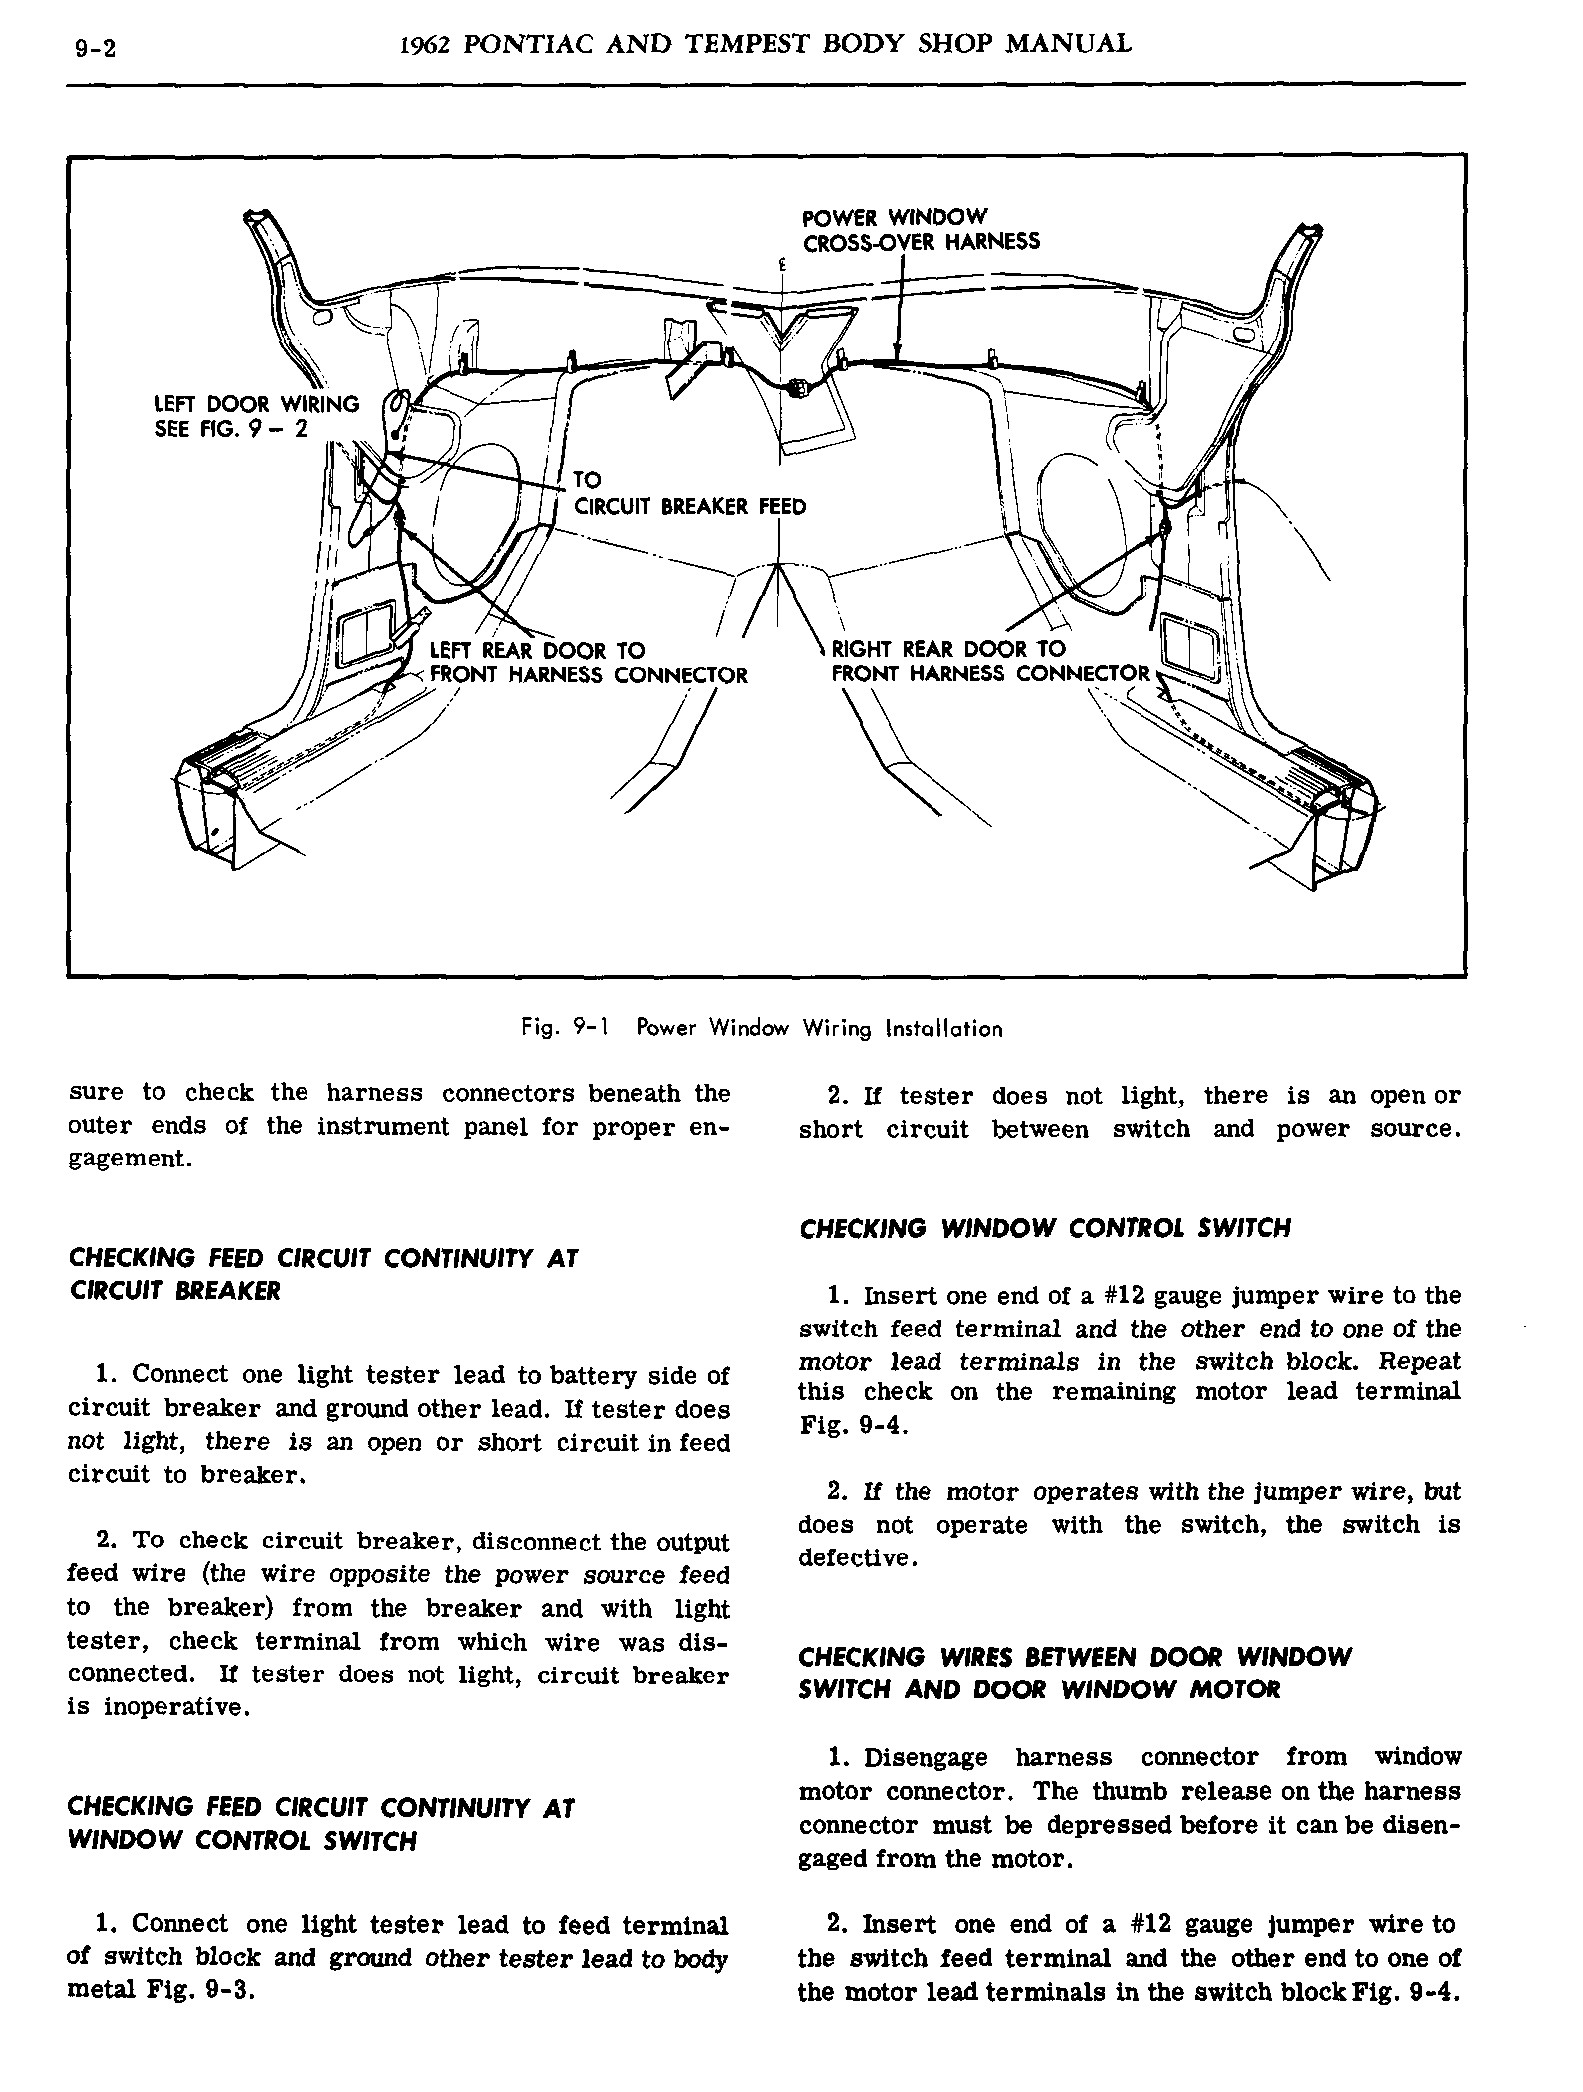 1962 Pontiac Shop Manual- Electrical Page 2 of 21